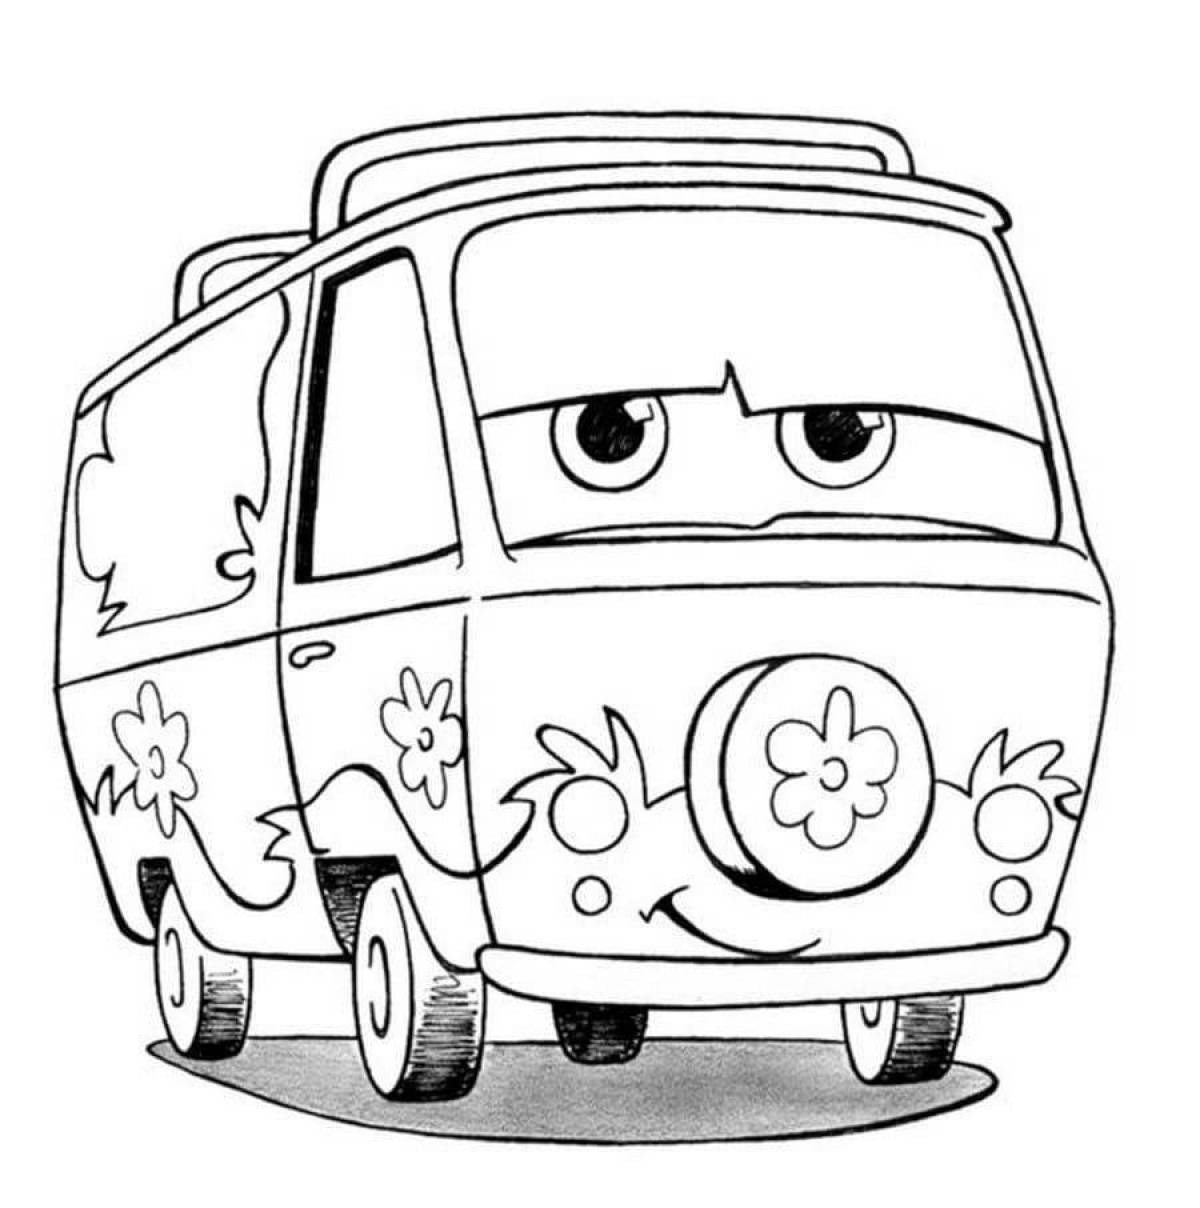 Coloring pages colorful cars for girls